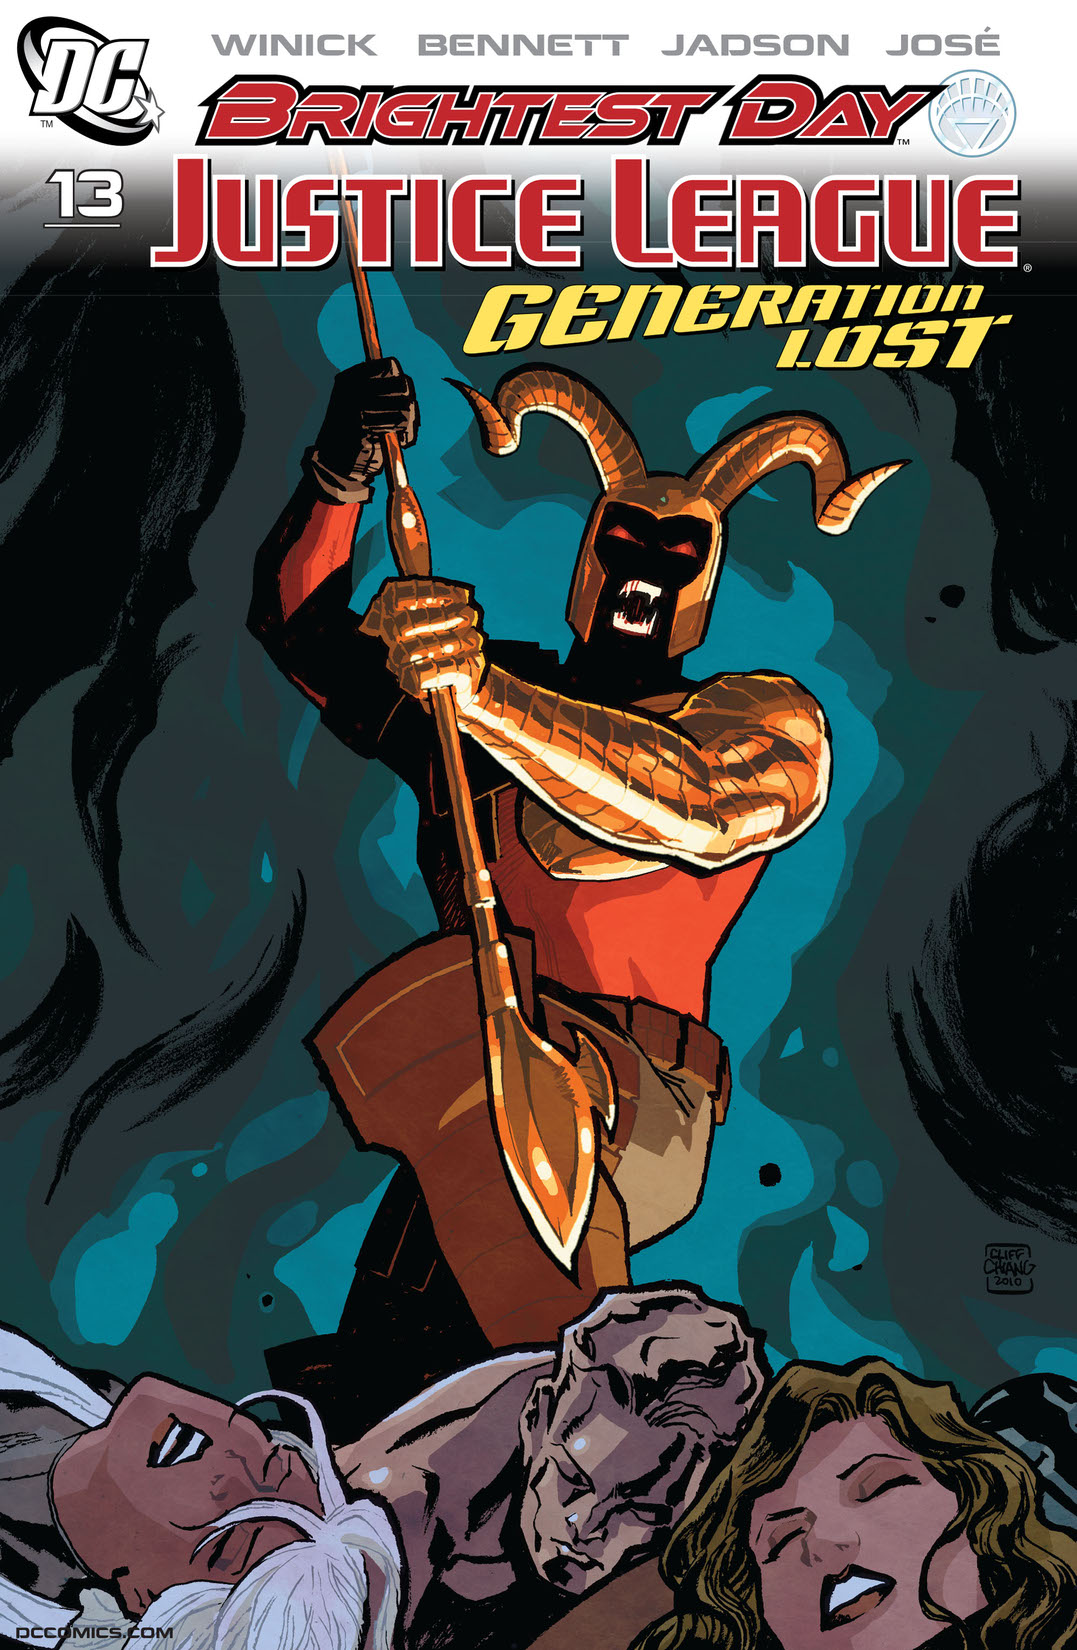 Justice League: Generation Lost #13 preview images